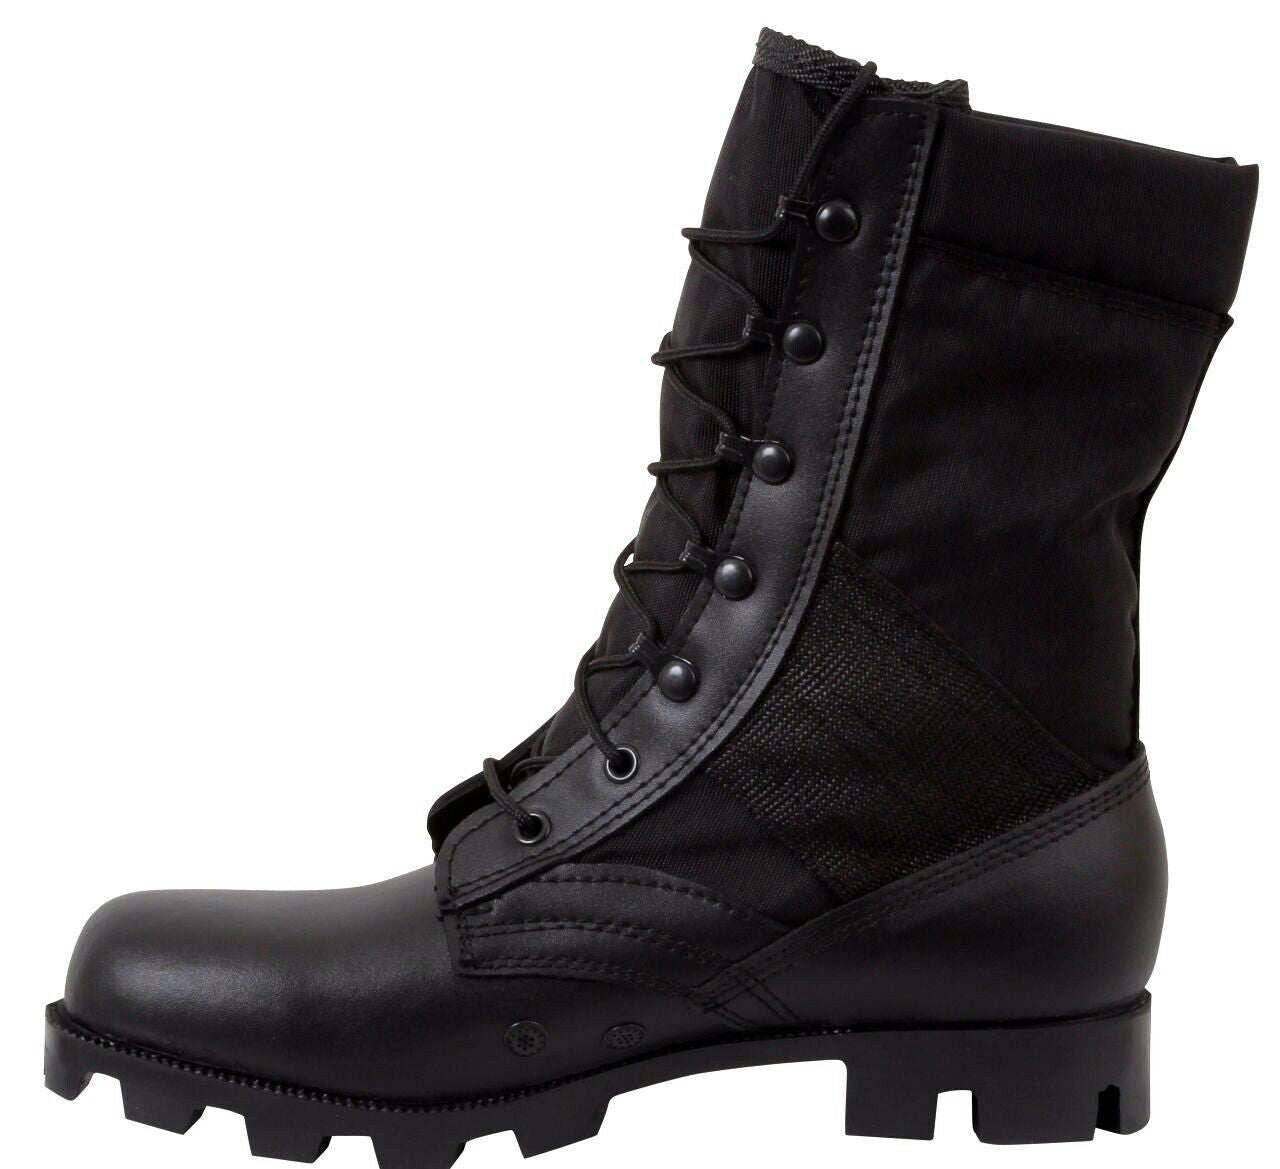 Rothco Black G.I. Type Speedlace Jungle Boots - 9 Inch